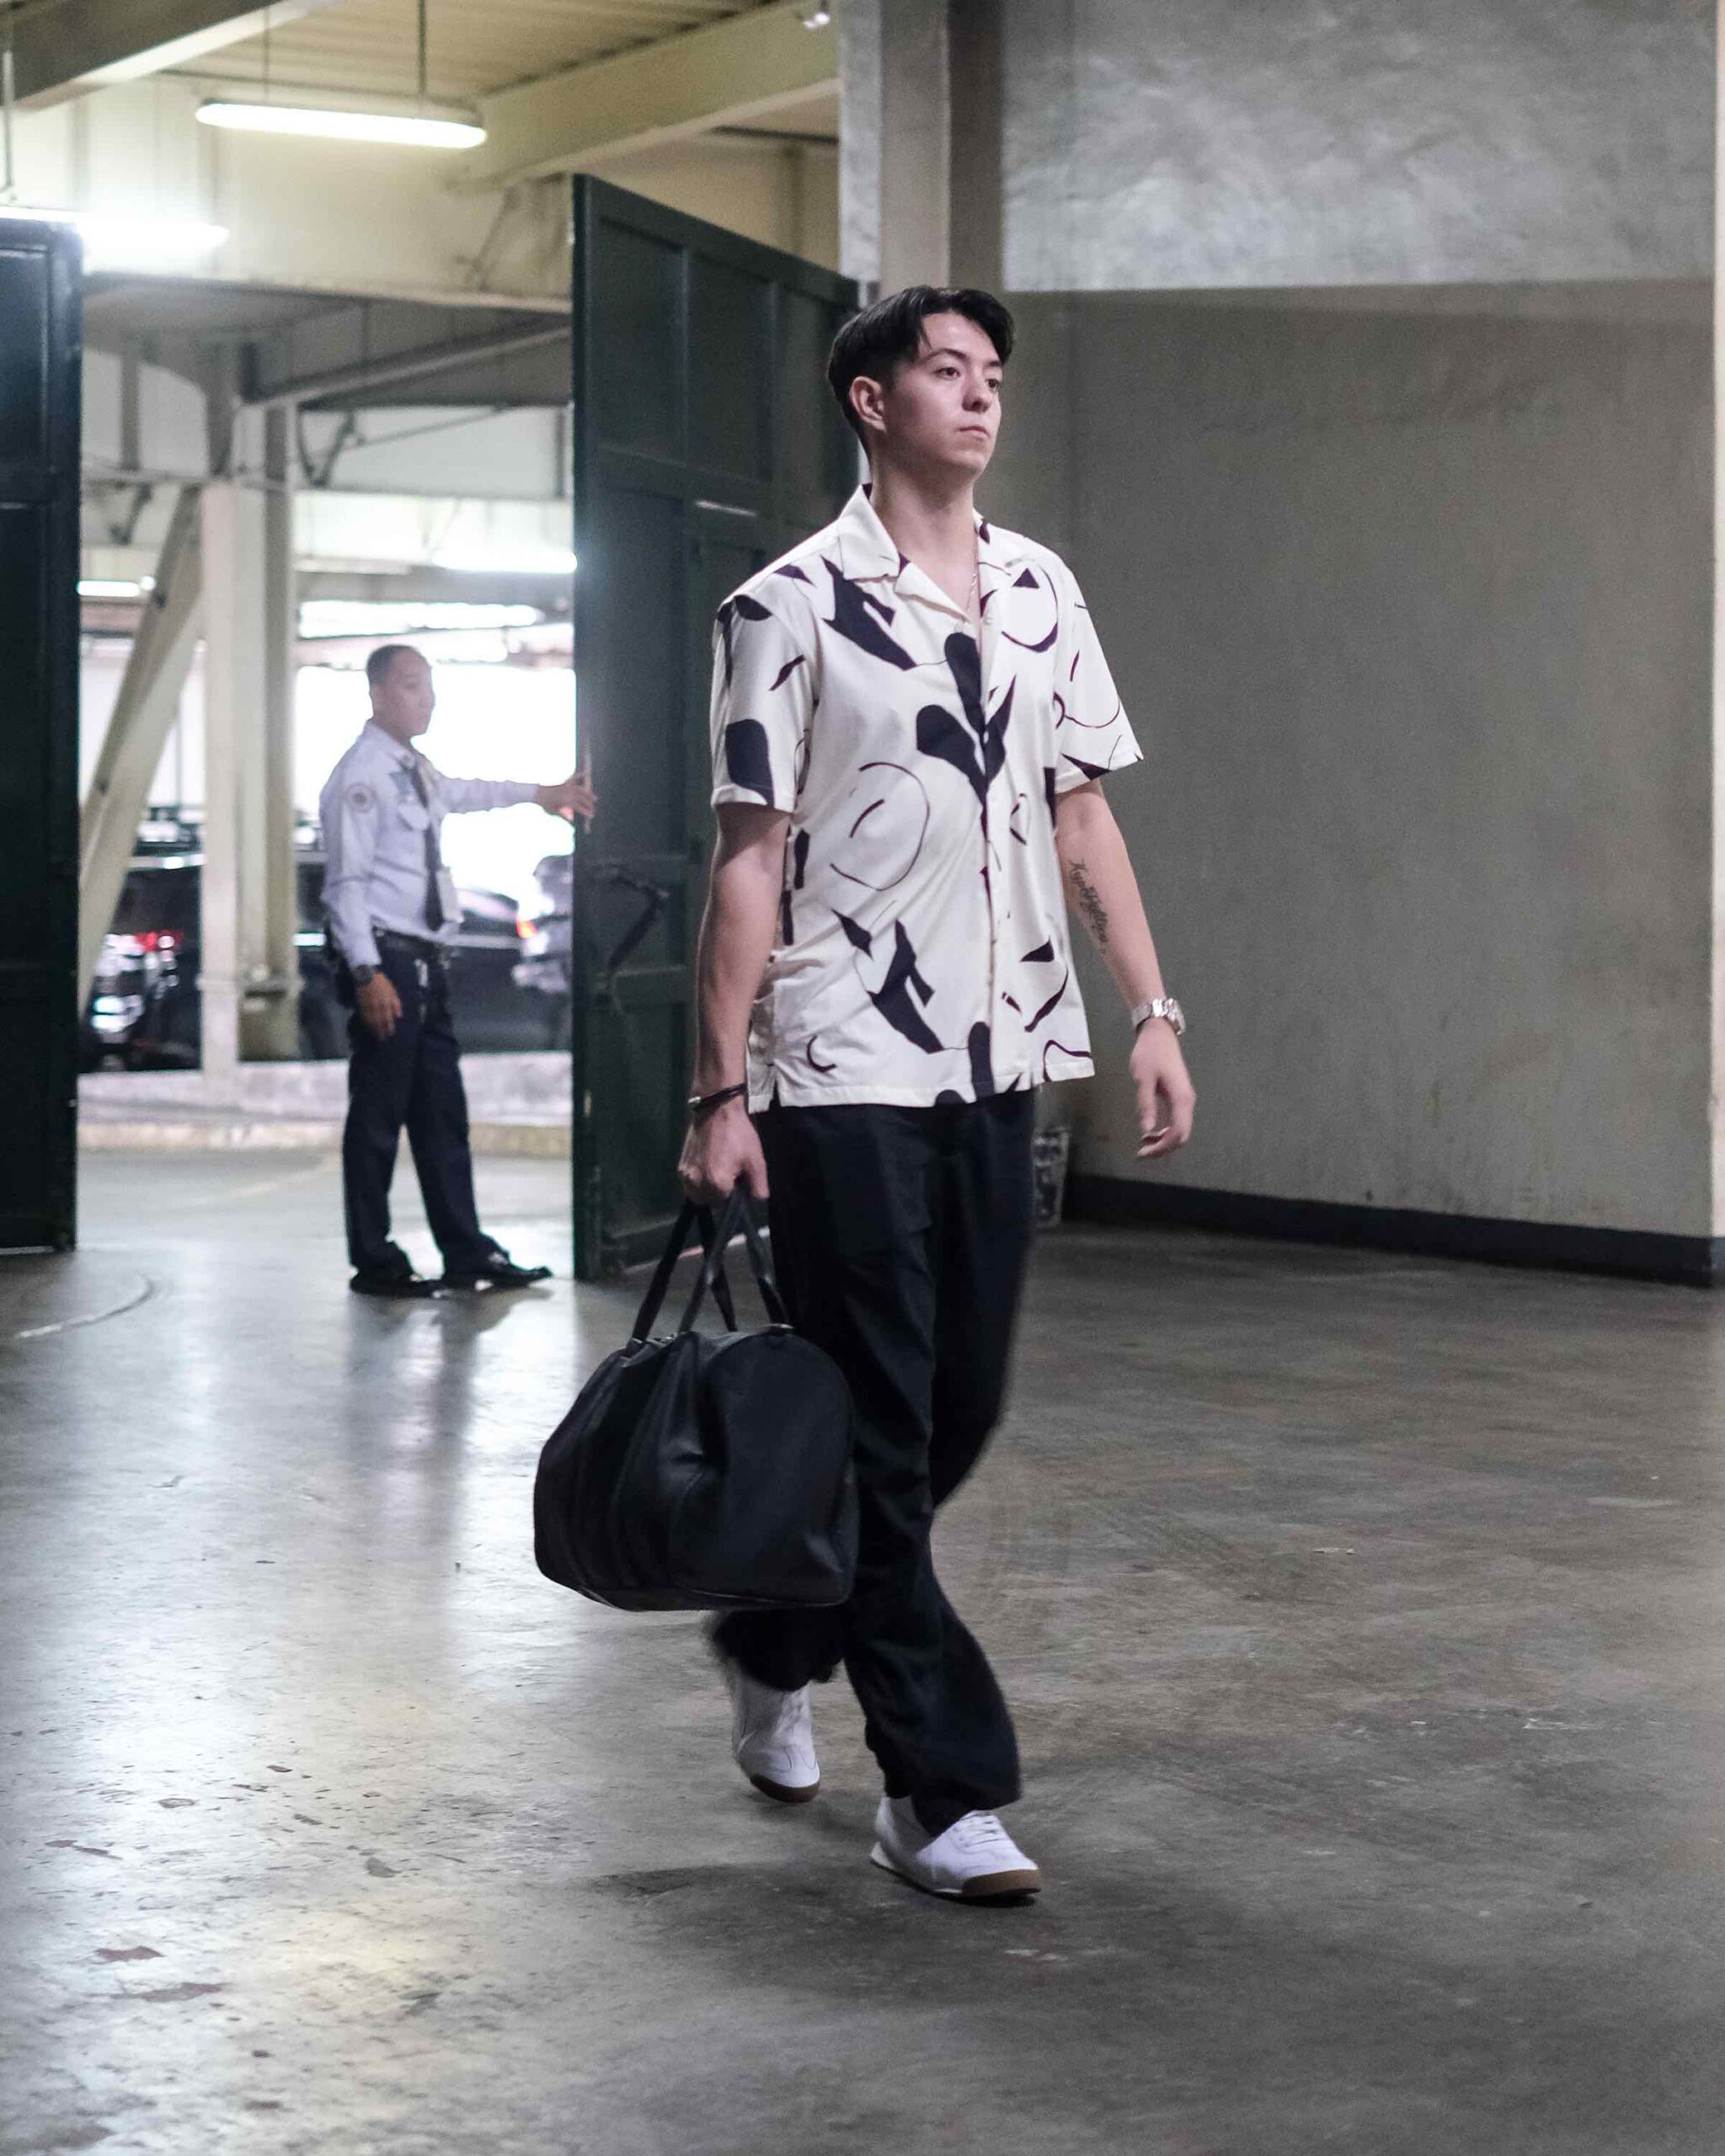 The GAME UAAP Tunnel Vision Fashion Trends: Jack Cruz-Dumont (UE Red Warriors)